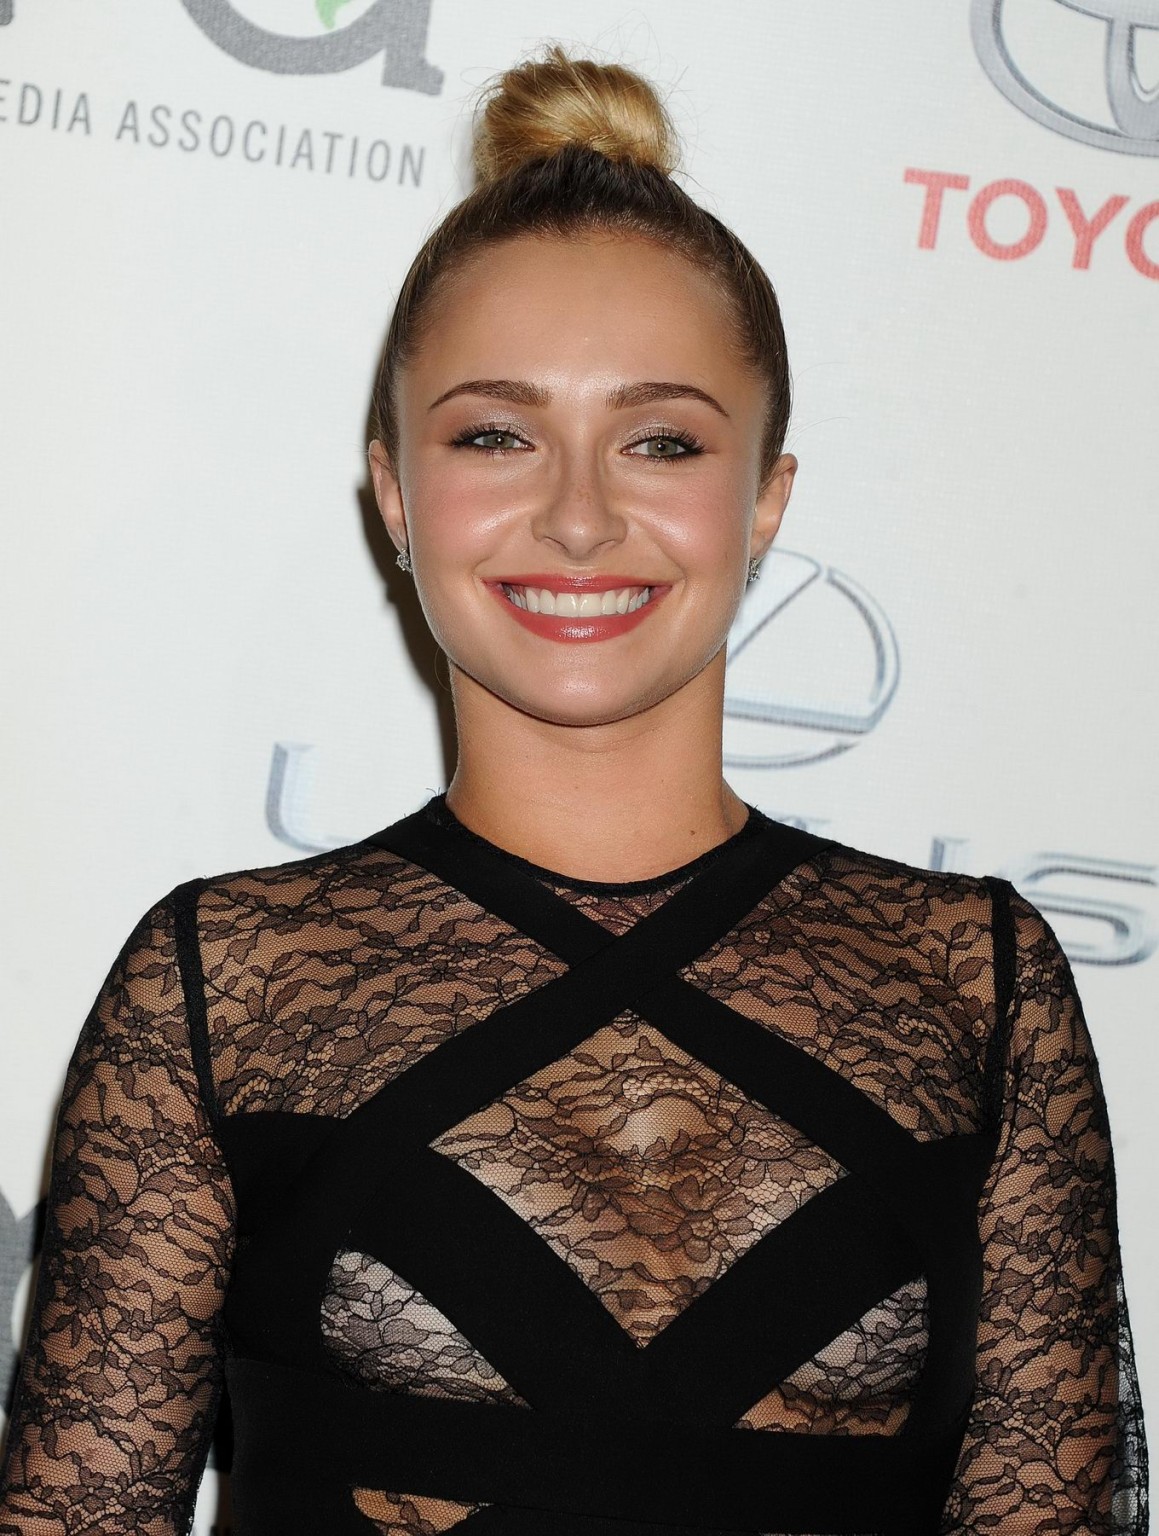 Hayden Panettiere wearing a partially see through dress at the 23rd Annual Envir #75215355